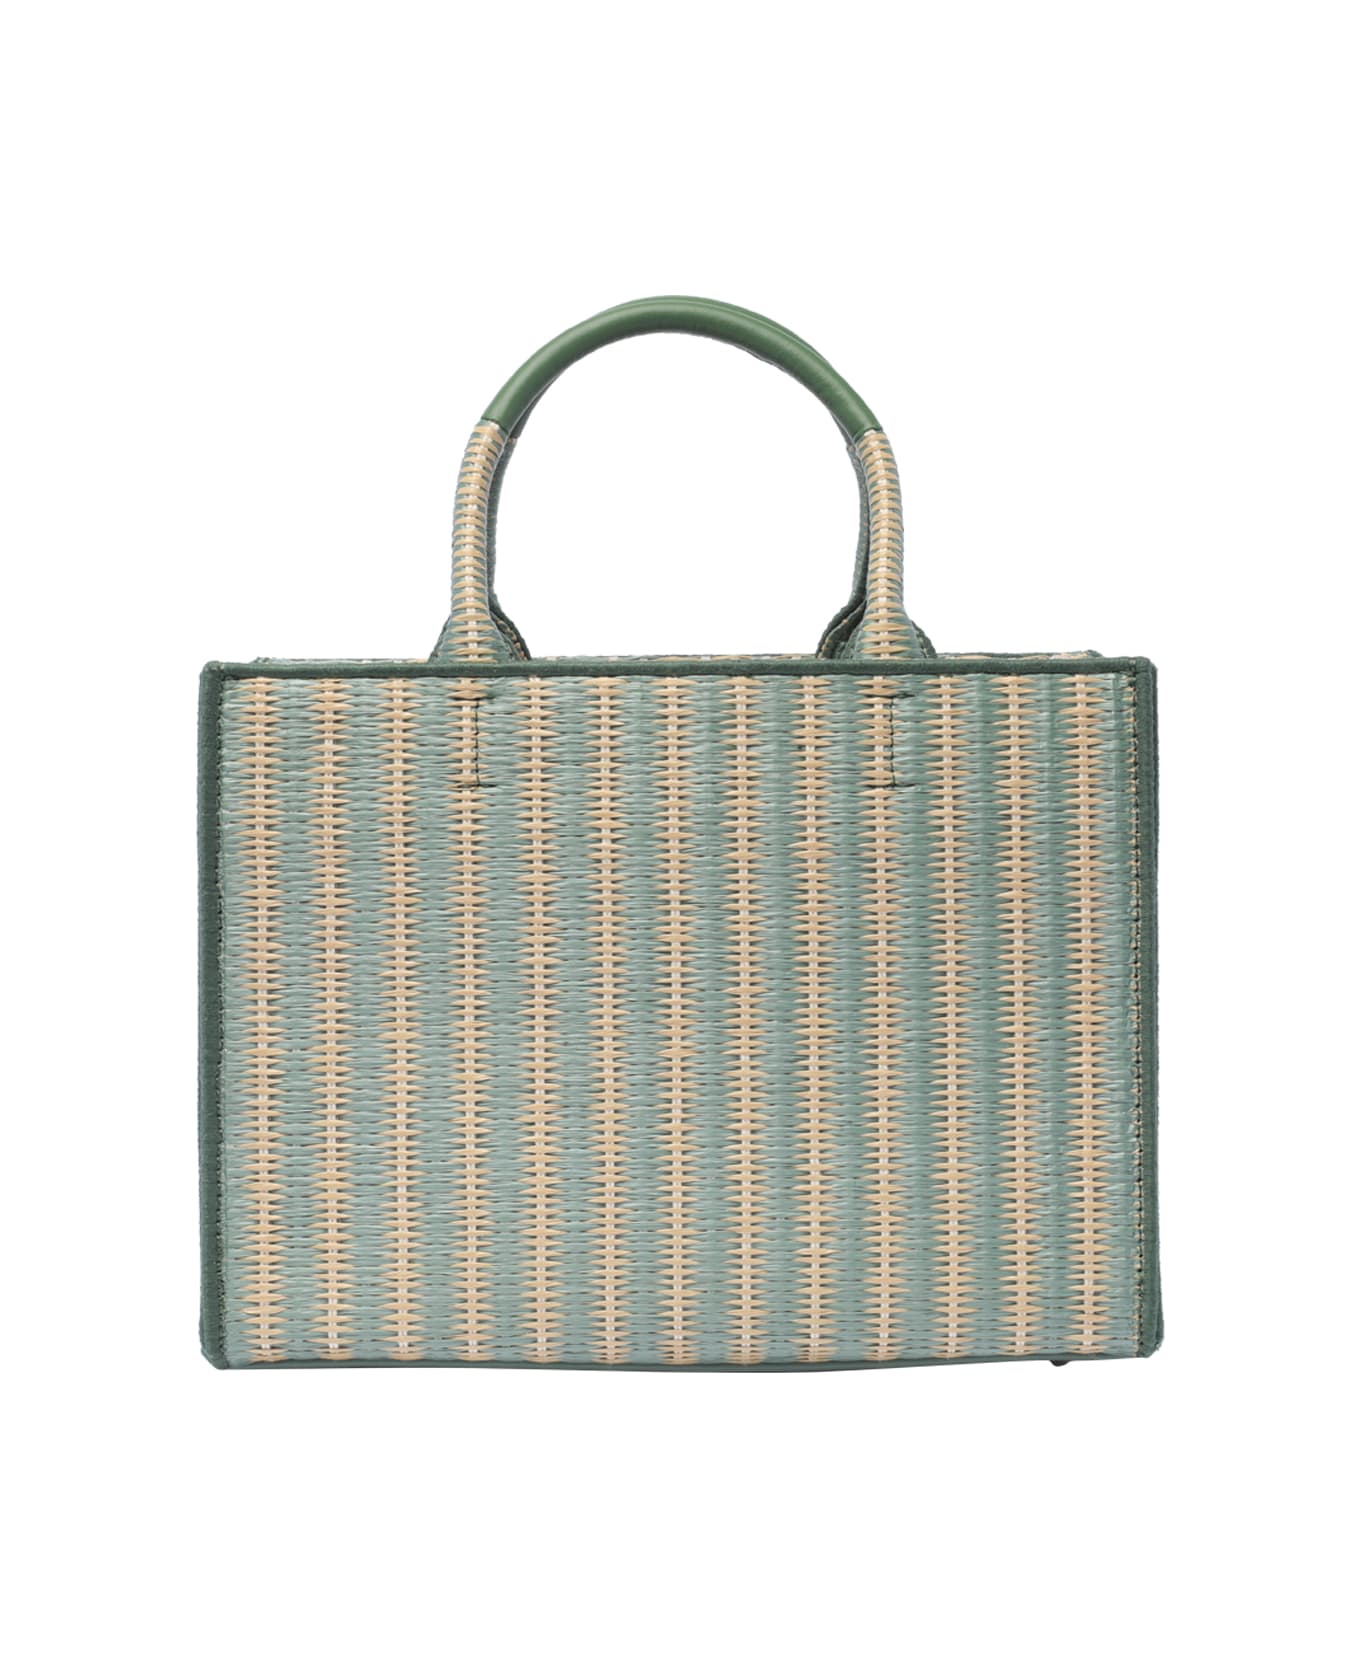 Furla Opportunity Tote Bag - S Toni Mineral Green トートバッグ